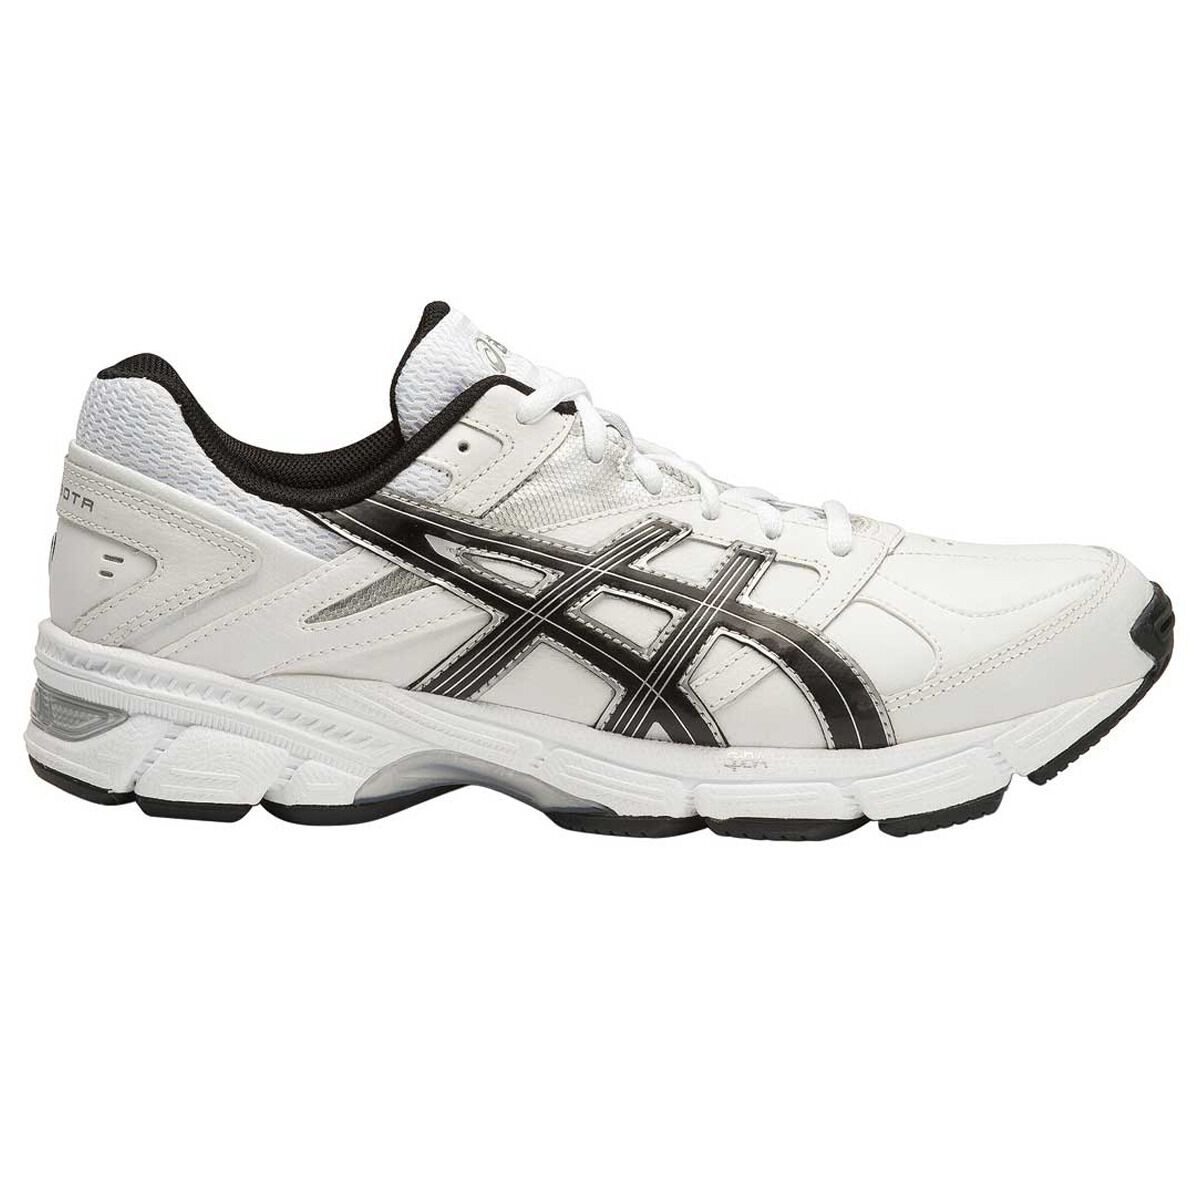 asics white leather sneakers Cheaper 